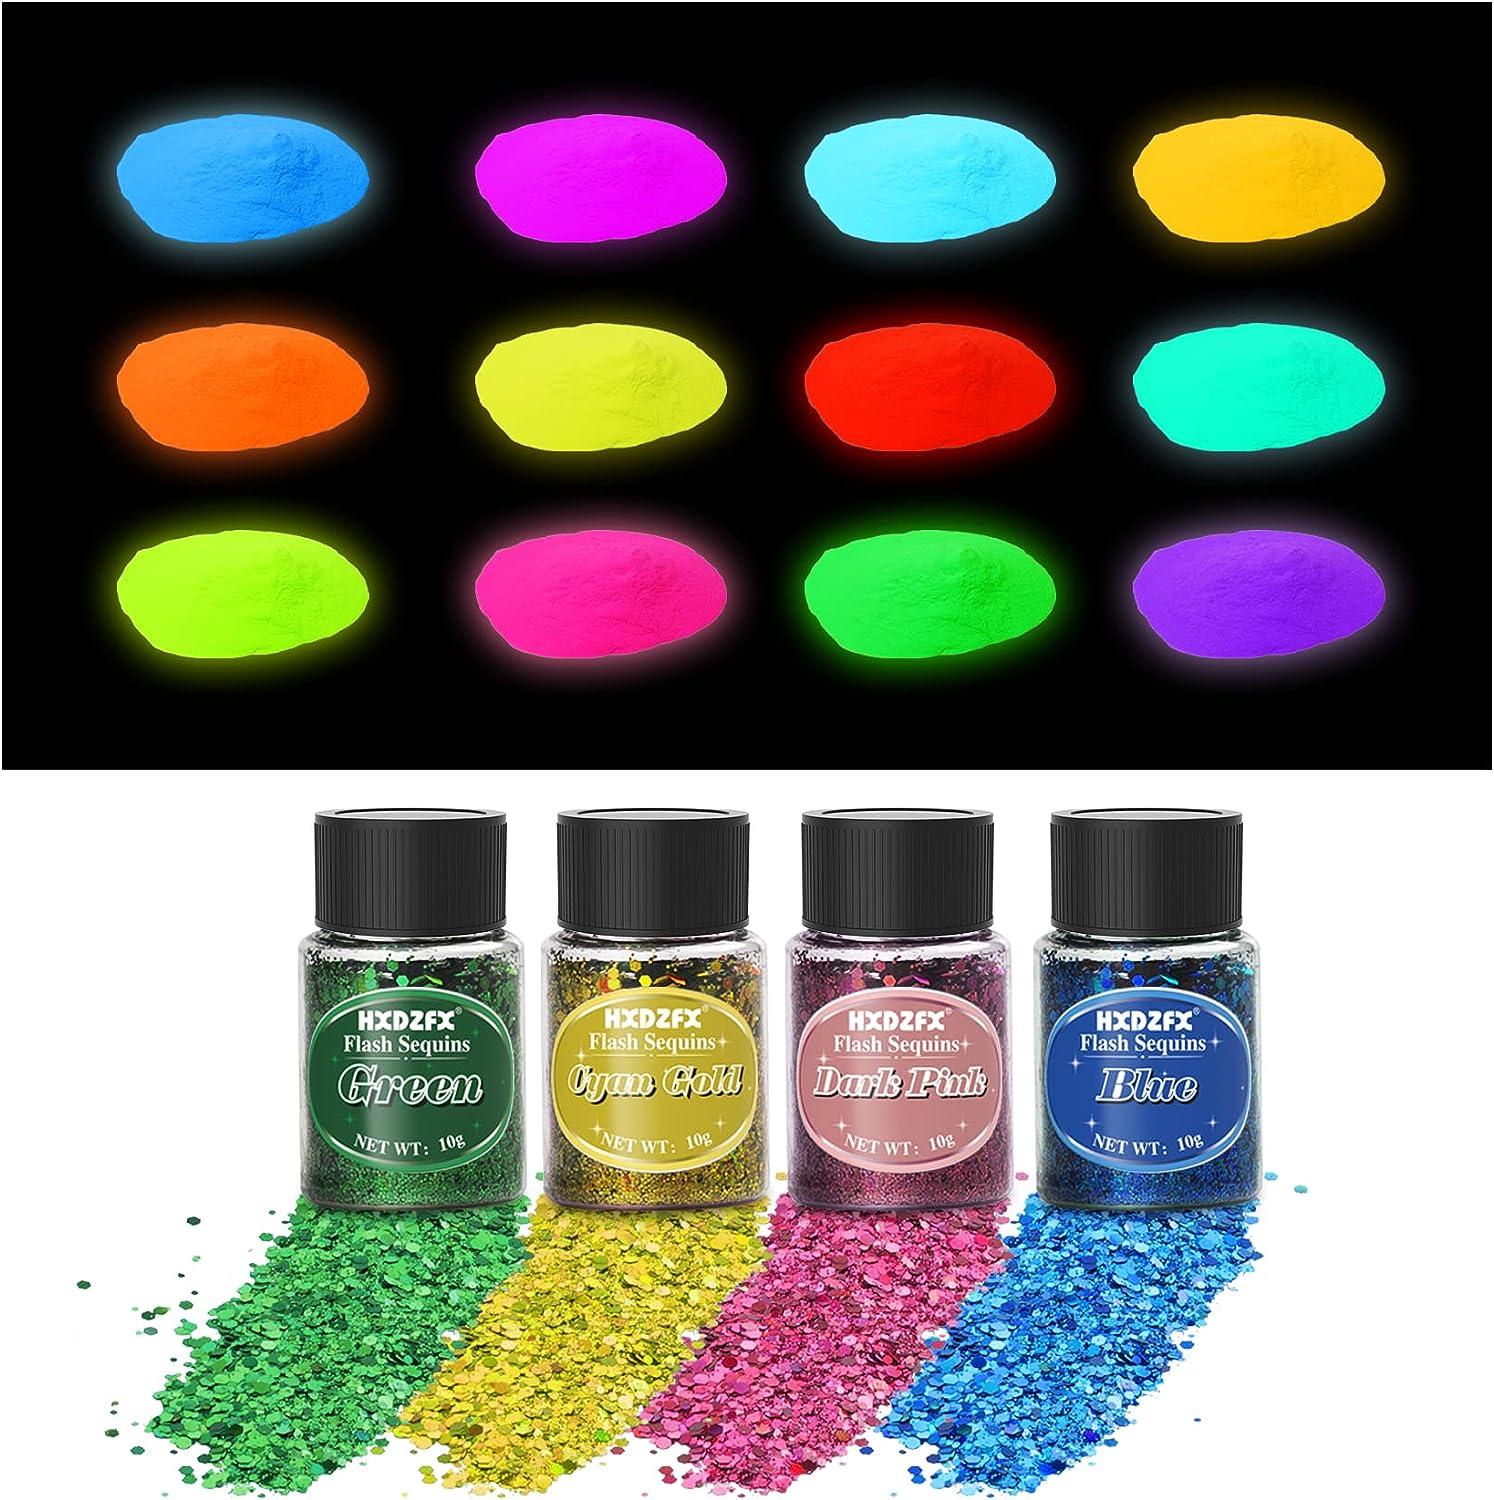 Green To Green - Glow In The Dark Mica – Glitter Makes It